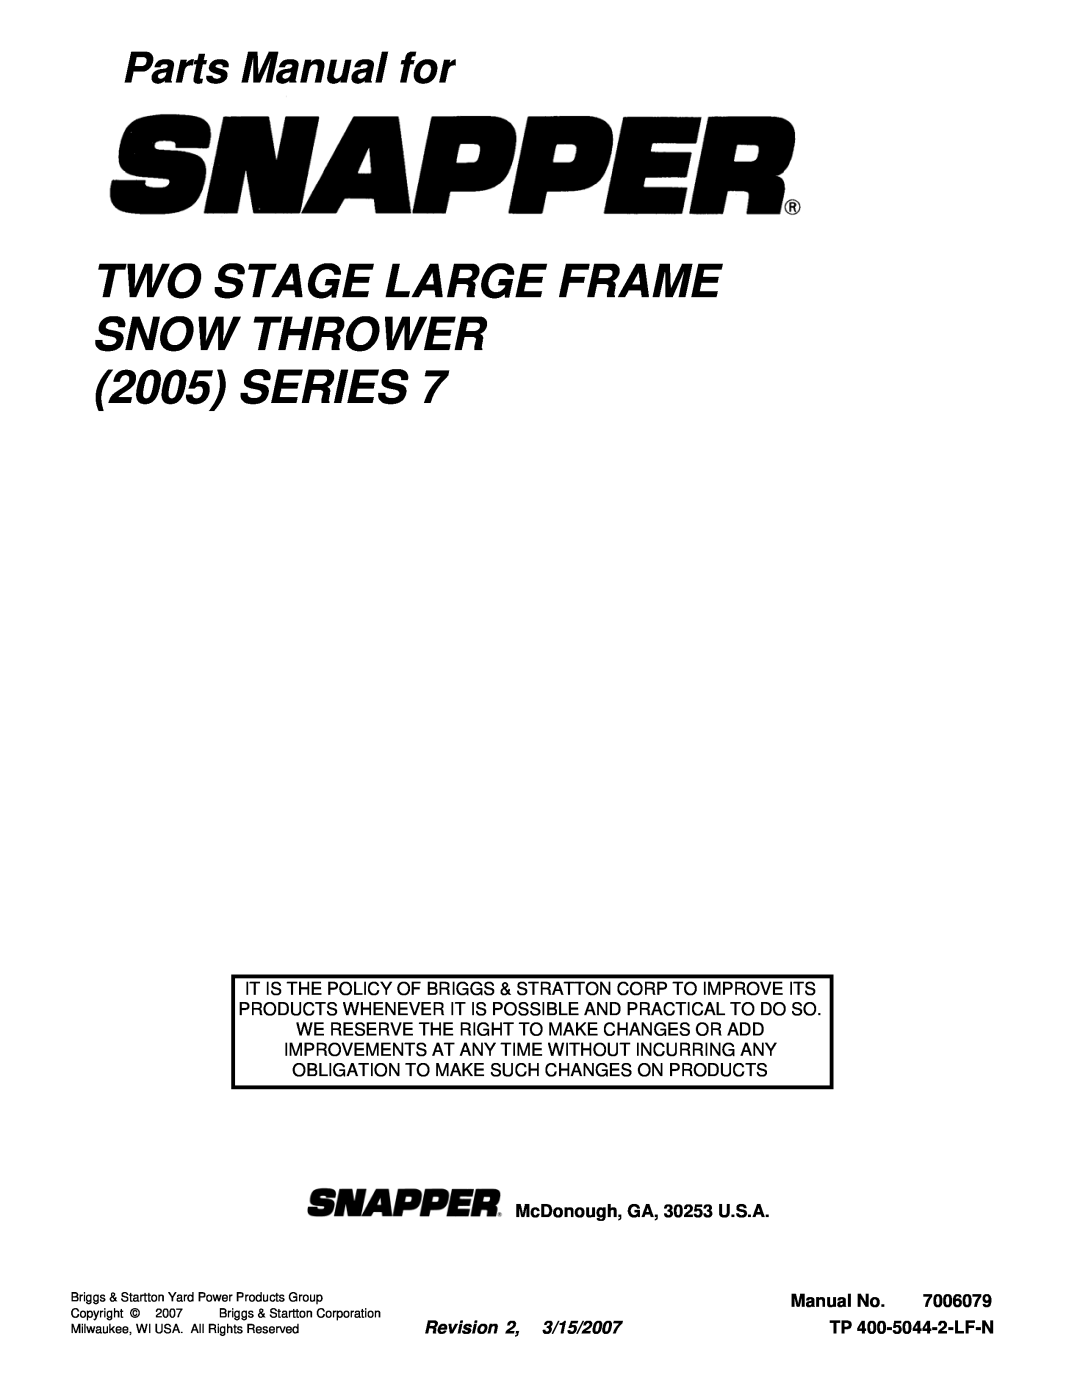 Snapper E12387, E9247, E10287, 9247E TWO STAGE LARGE FRAME SNOW THROWER 2005 SERIES, Parts Manual for, Revision 2, 3/15/2007 